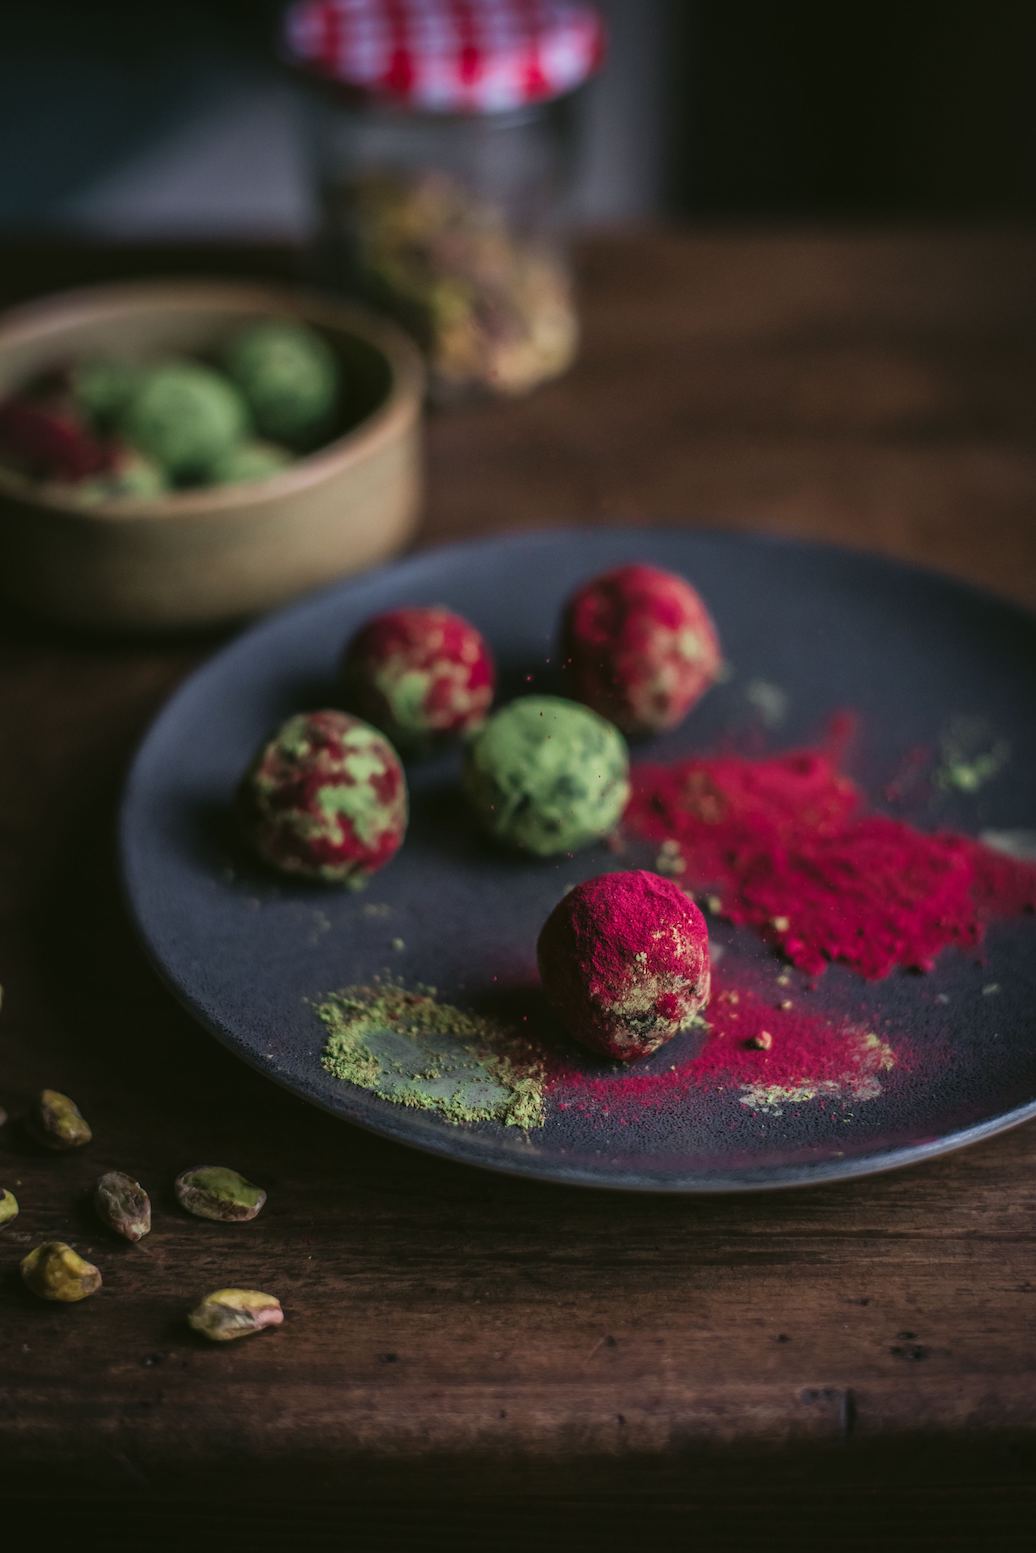 Energy balls made with pistachio powder and Adri Wellness' Beetroot powder placed on a black plate with scattered beetroot powder